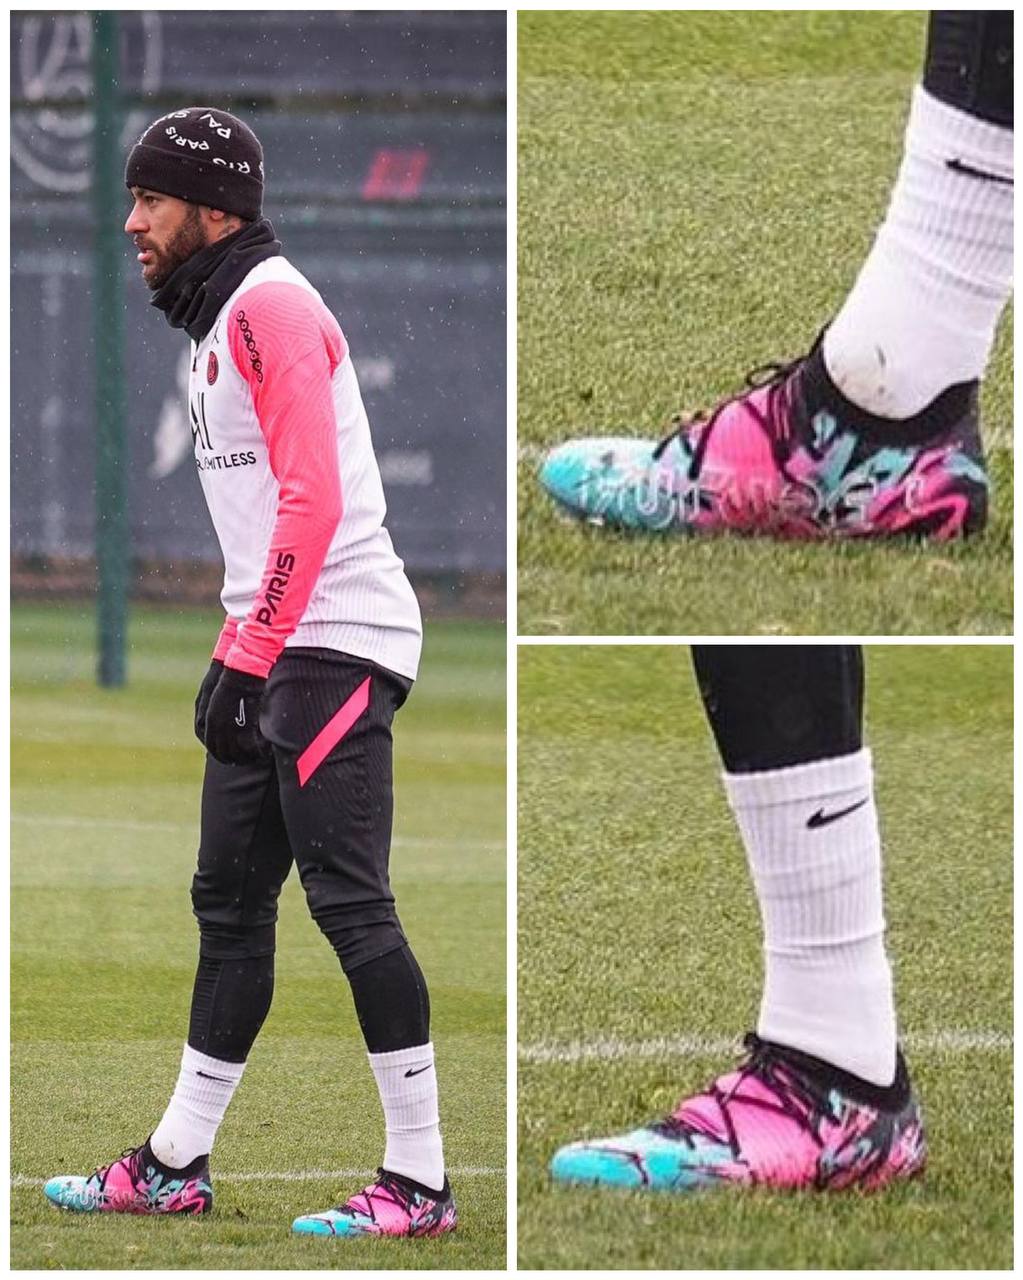 What Football Boots are Neymar Wearing? - Boot History - Future Z 1.1 - Creativity Pack